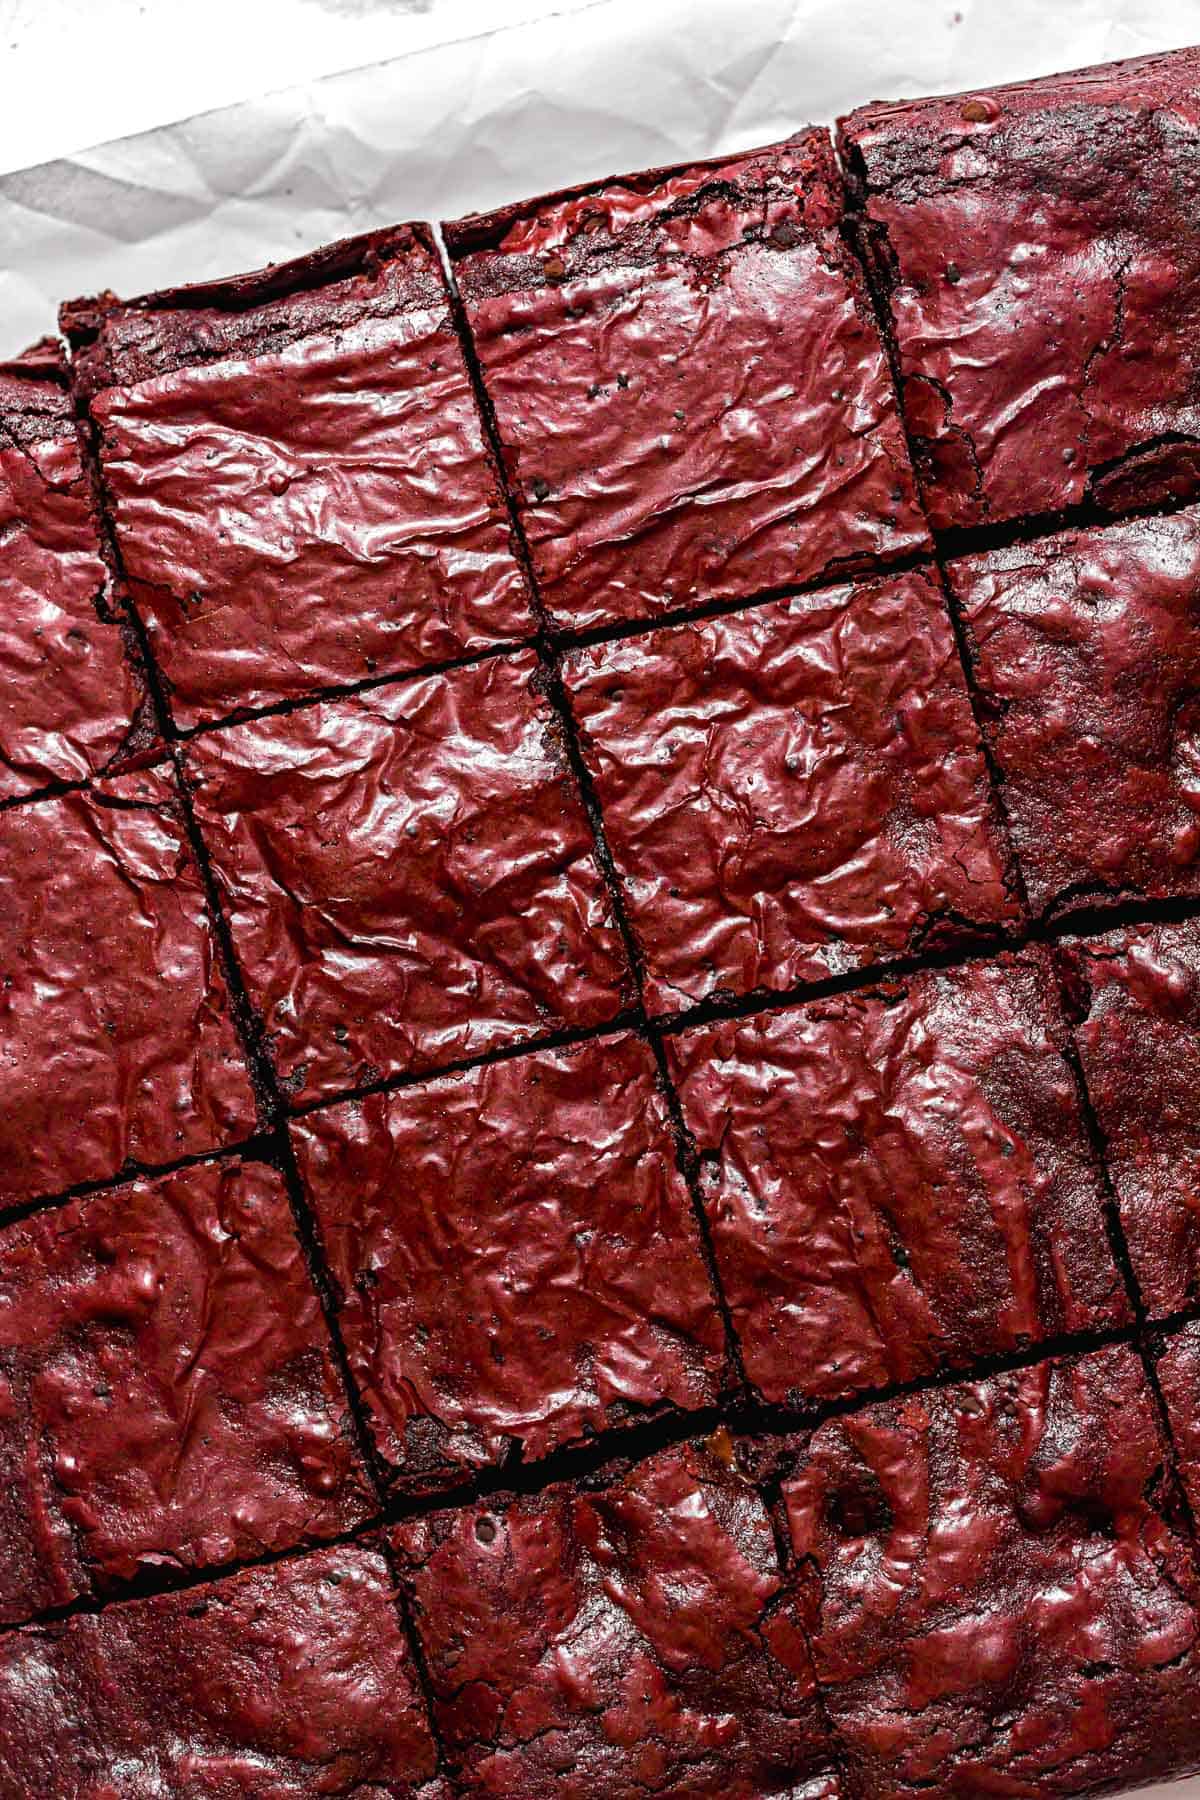 baked brownies cut into squares on parchment paper